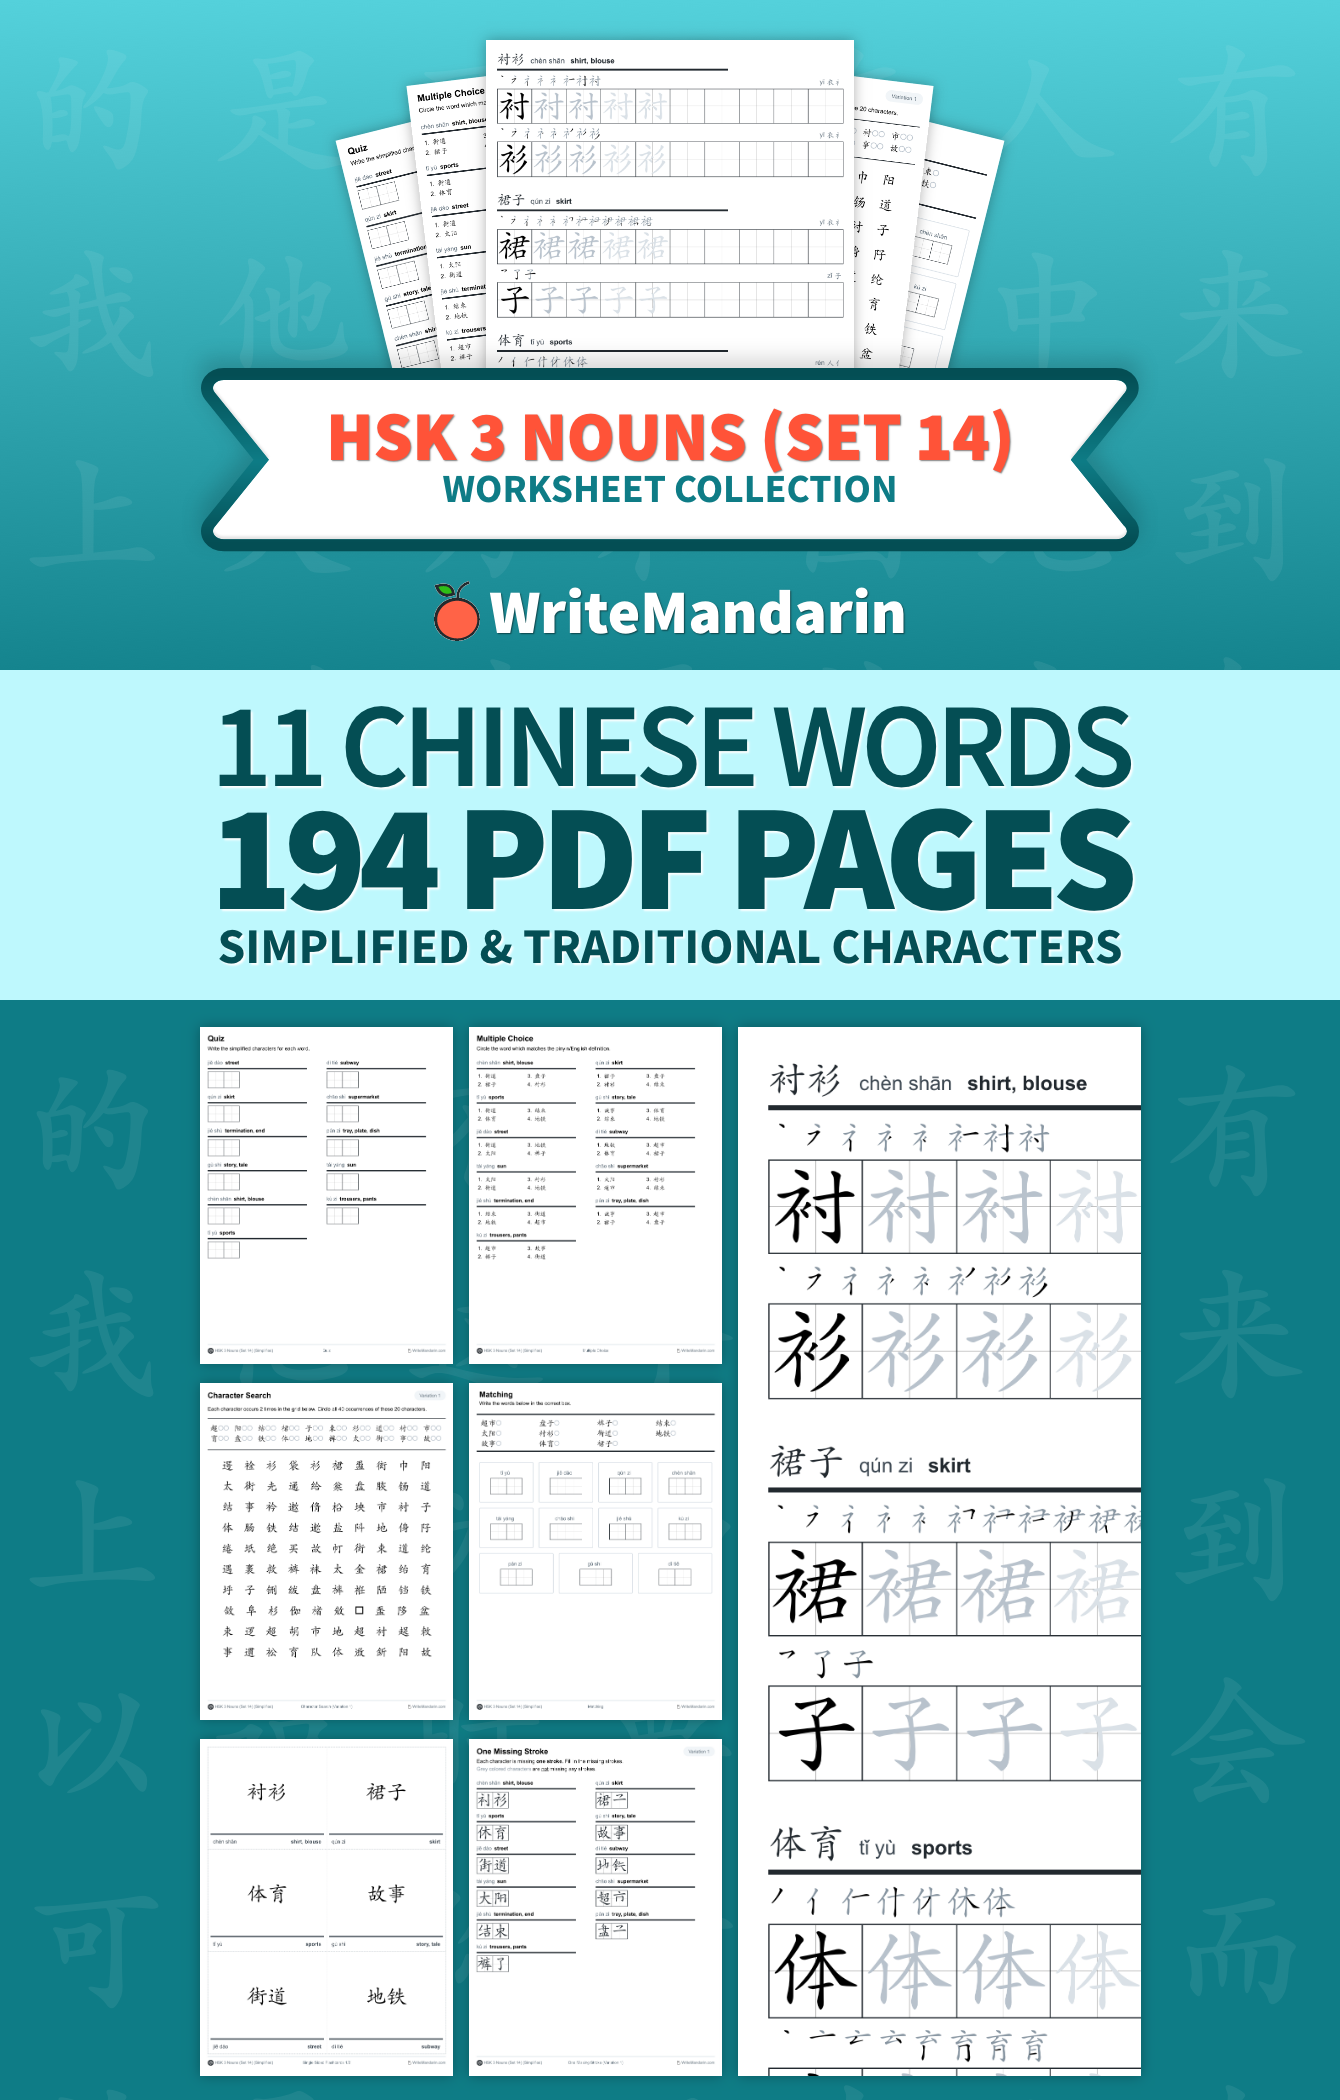 Preview image of HSK 3 Nouns (Set 14) worksheet collection